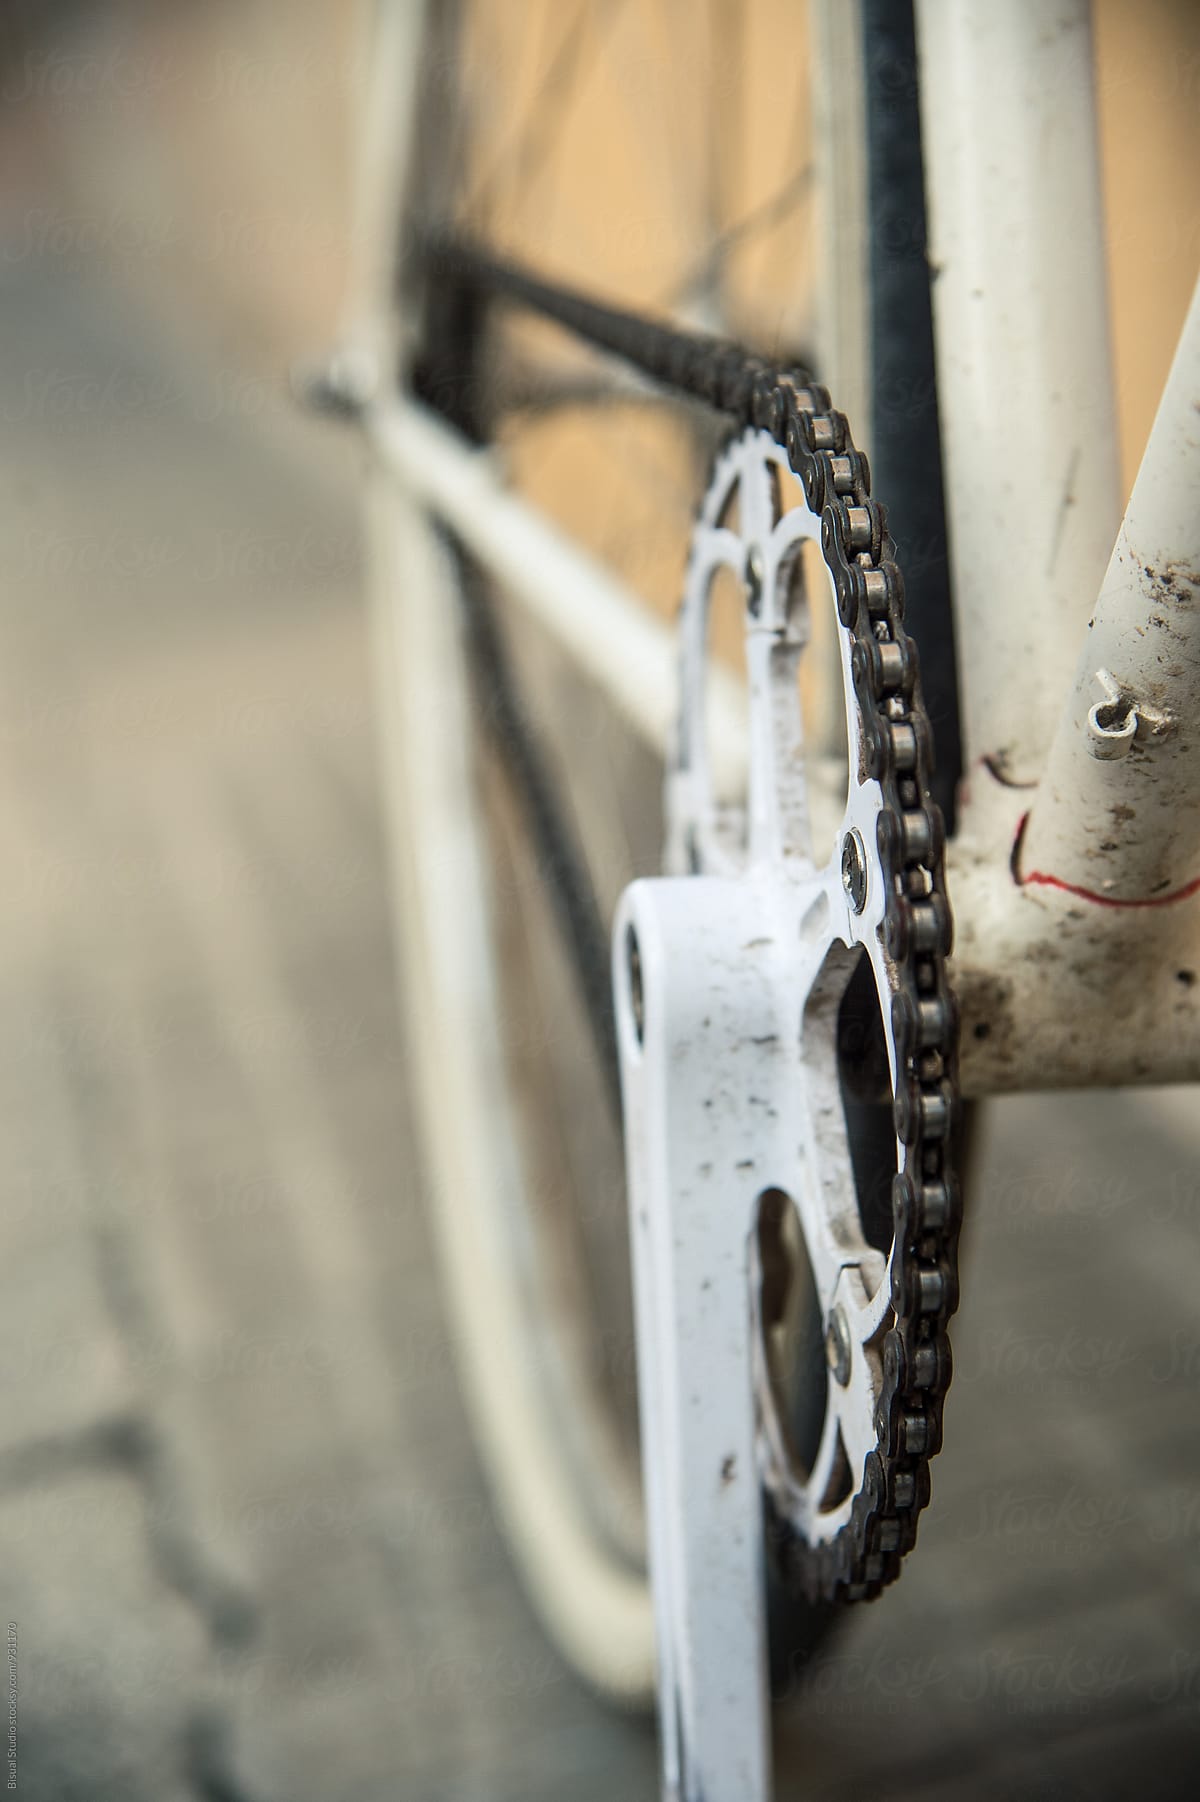 Bike chain on a white fixed gear bicycle